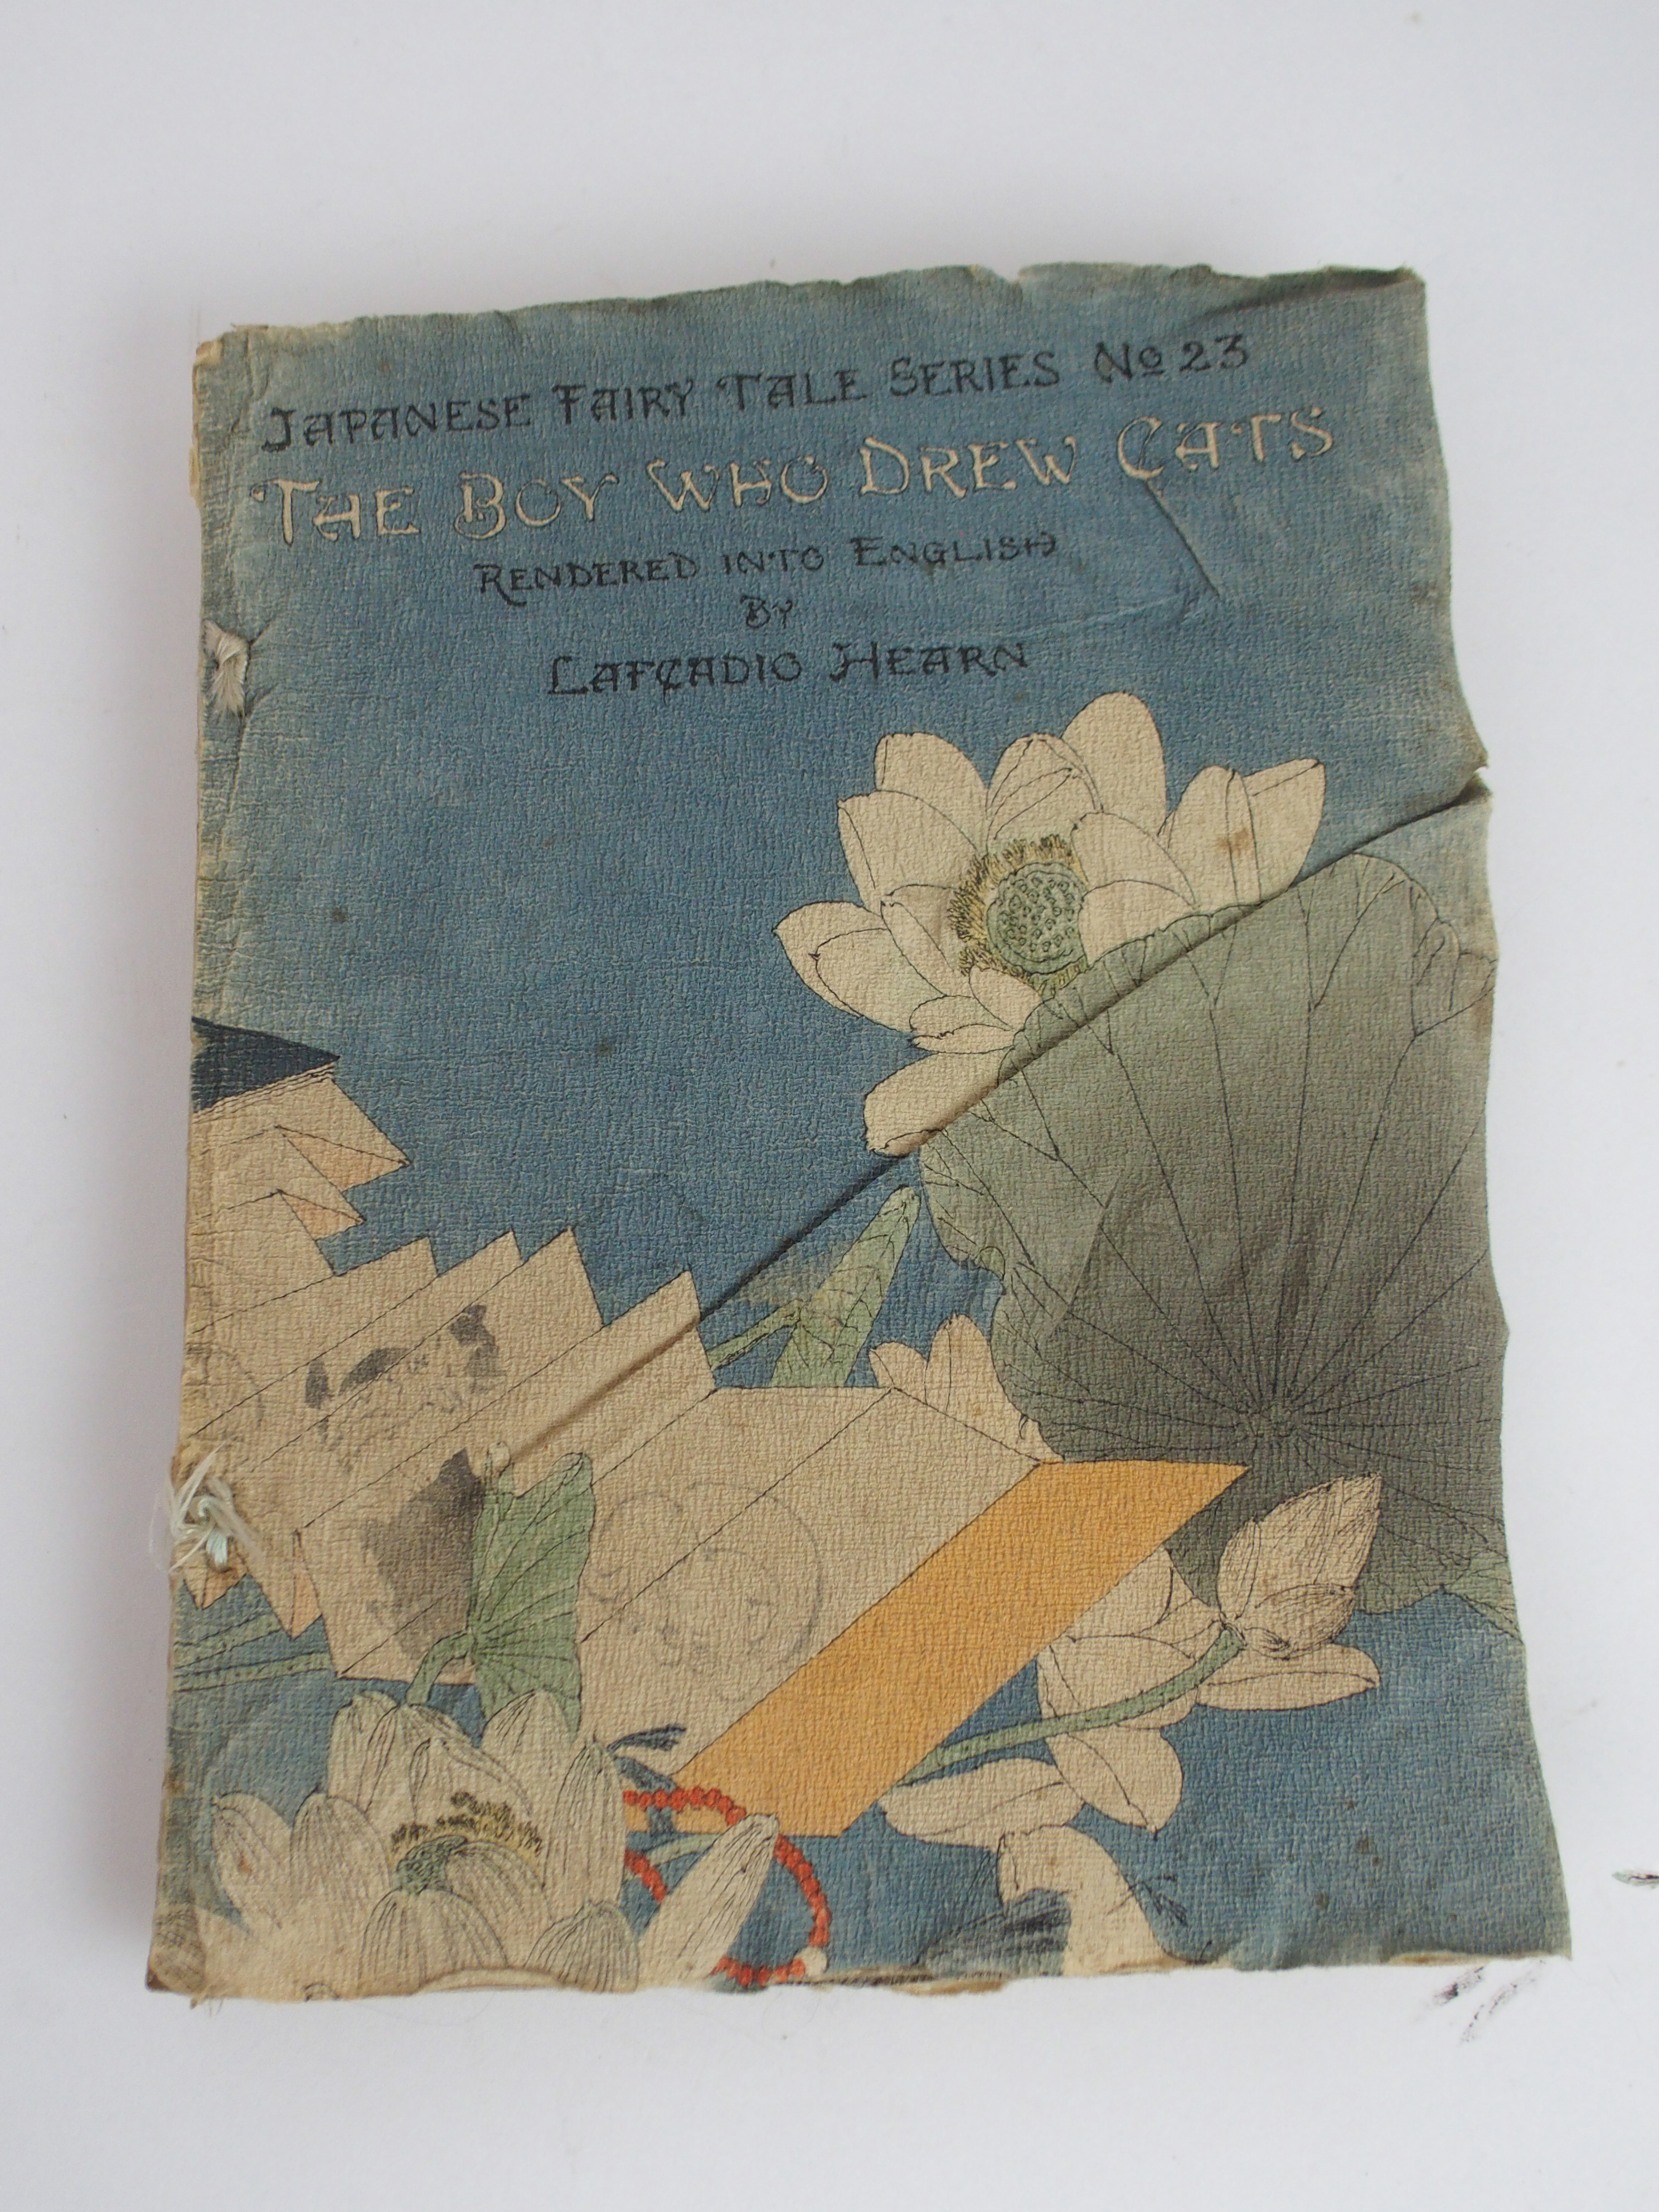 T HASEGAWA THE FLOWERS OF REMEMBRANCE by T H JAMES, Tokyo, Japan, 16 x 12cm, The boy who drew - Image 3 of 13